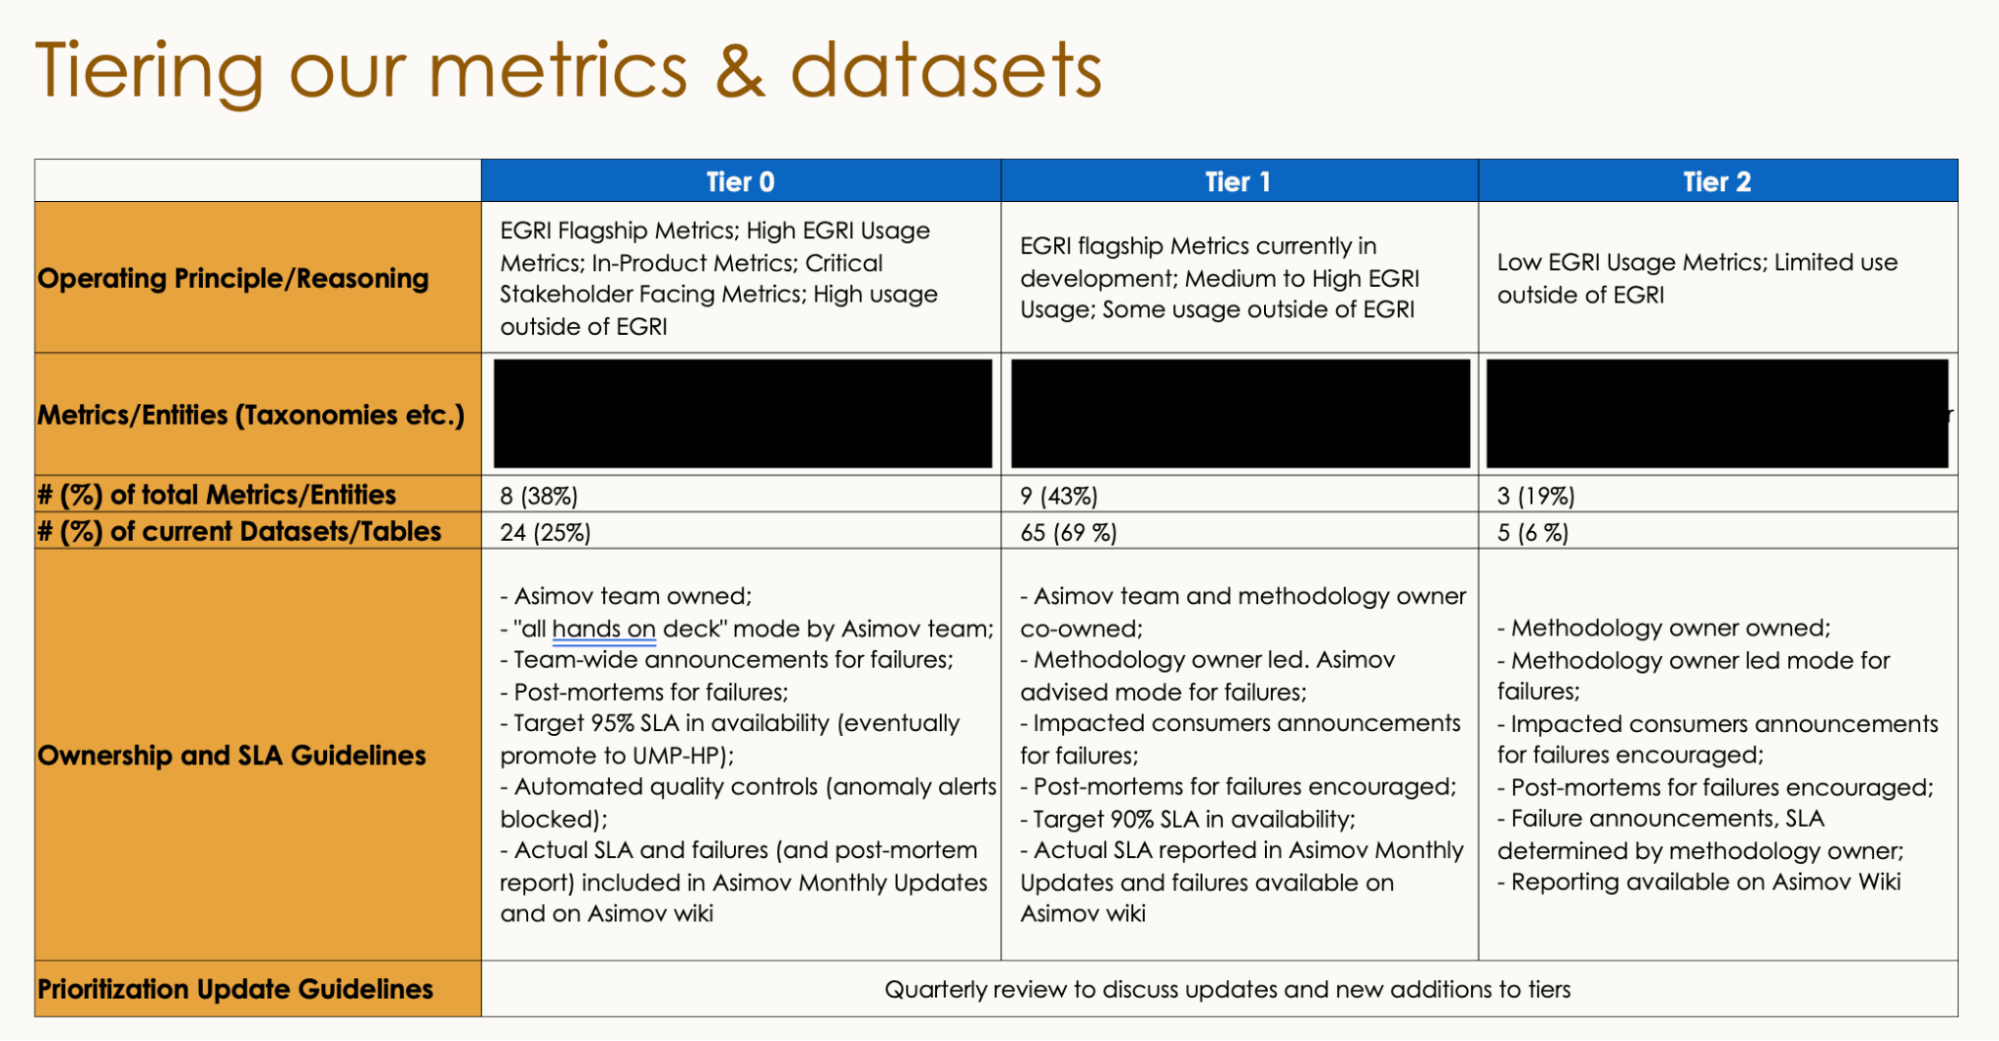 Table of metrics and datasets